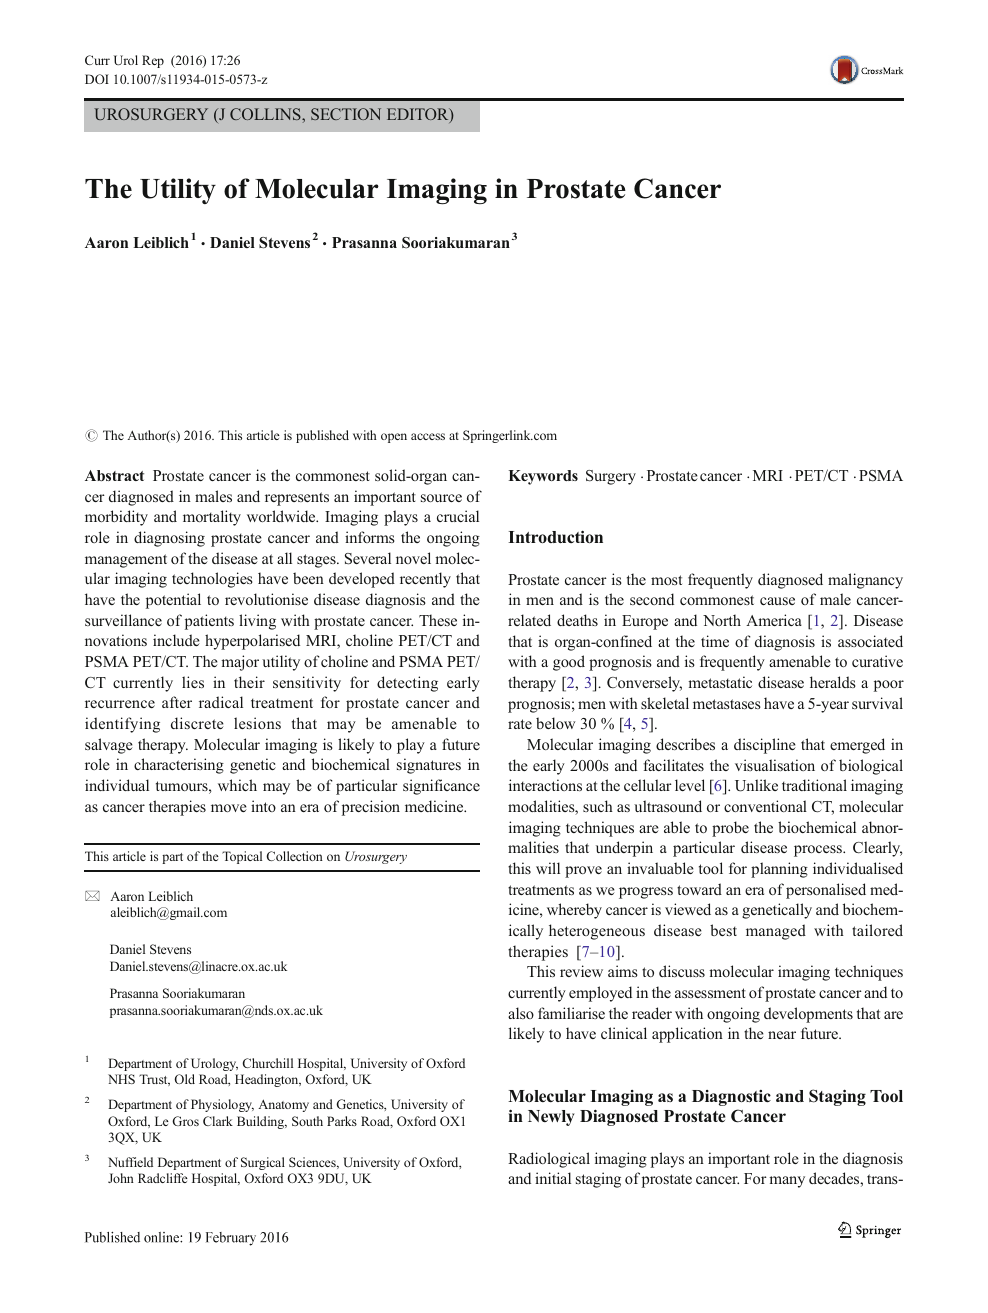 The Utility Of Molecular Imaging In Prostate Cancer Topic - 